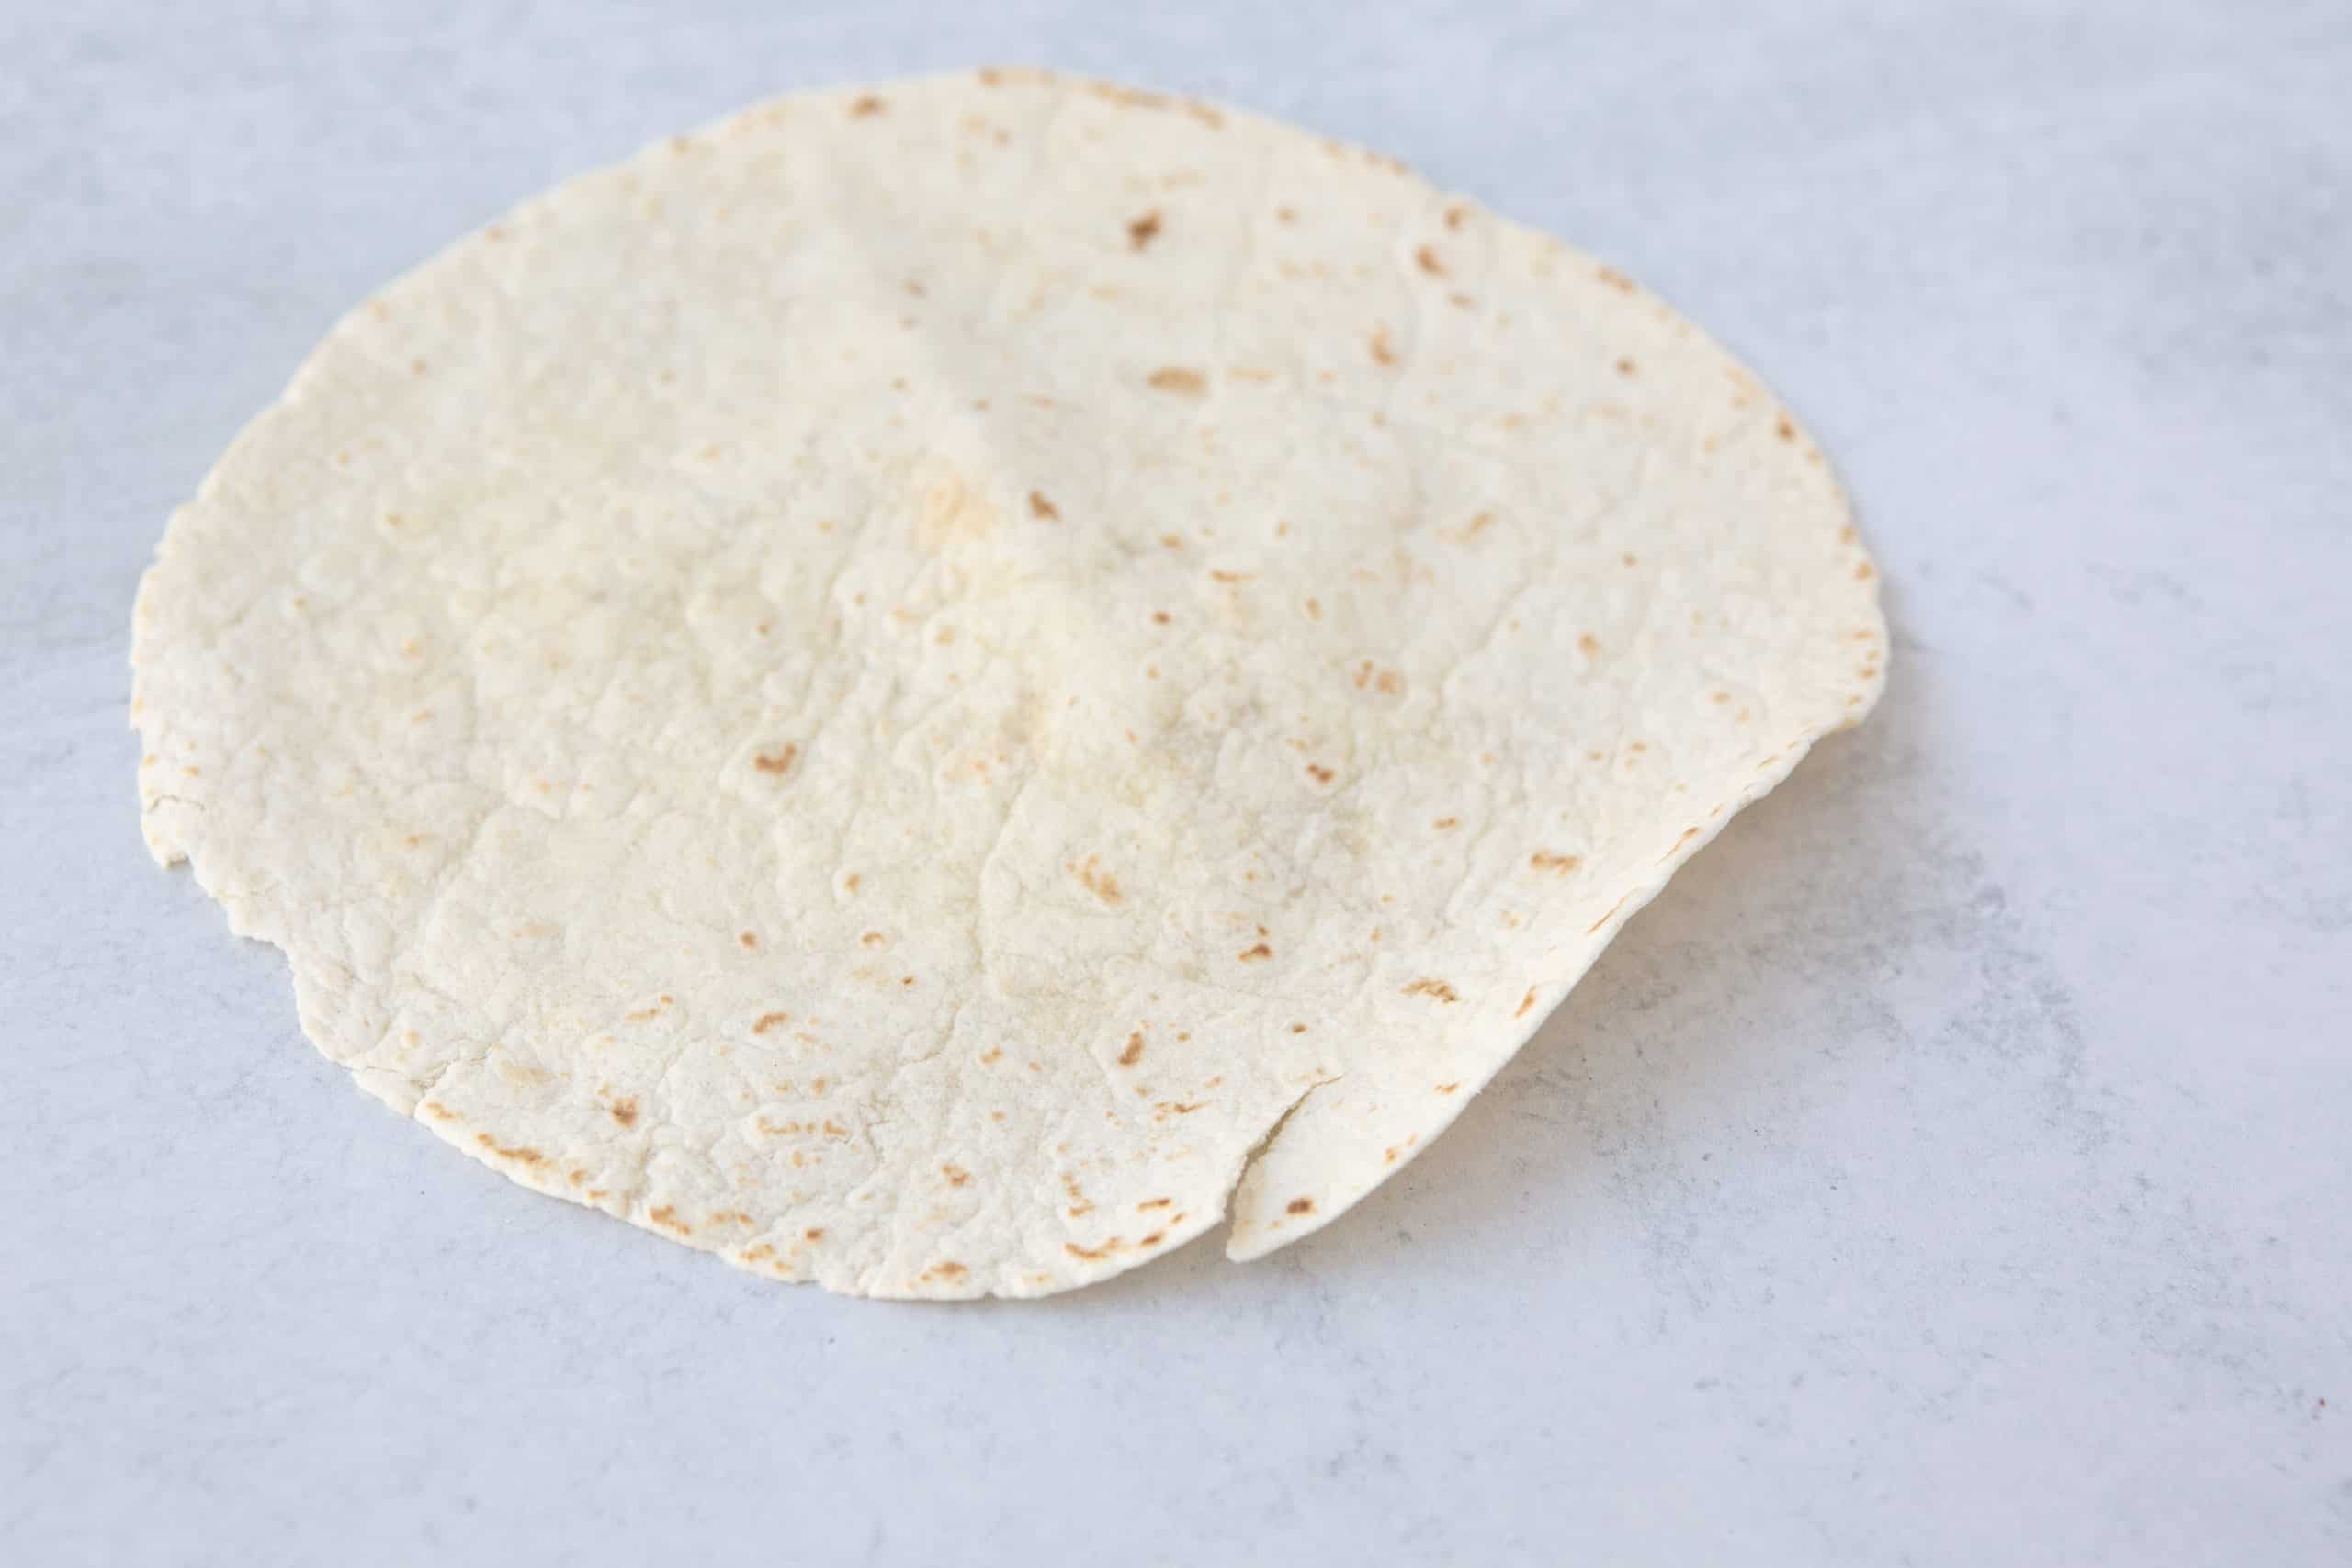 tortilla that is too bad to eat